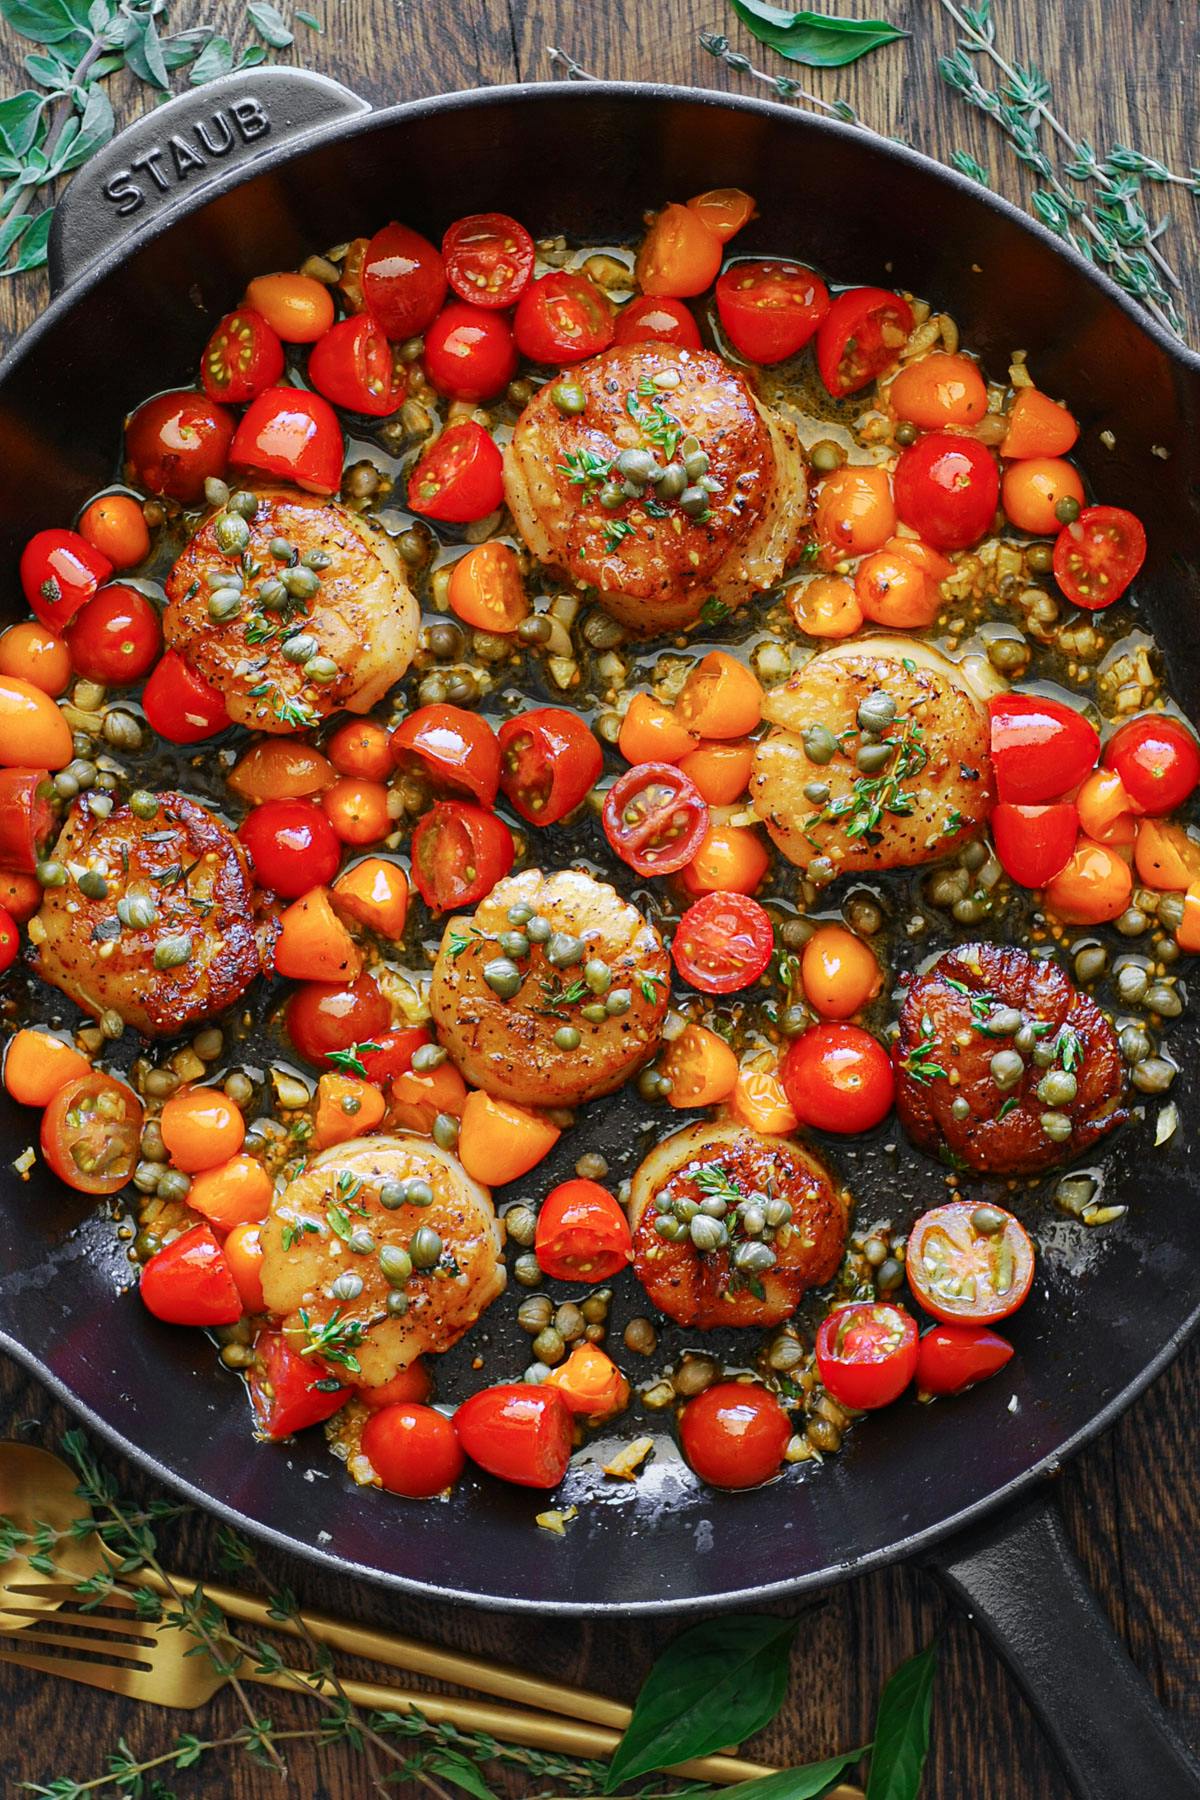 Mediterranean Scallops with Tomatoes, Capers, and Lemon Garlic Sauce